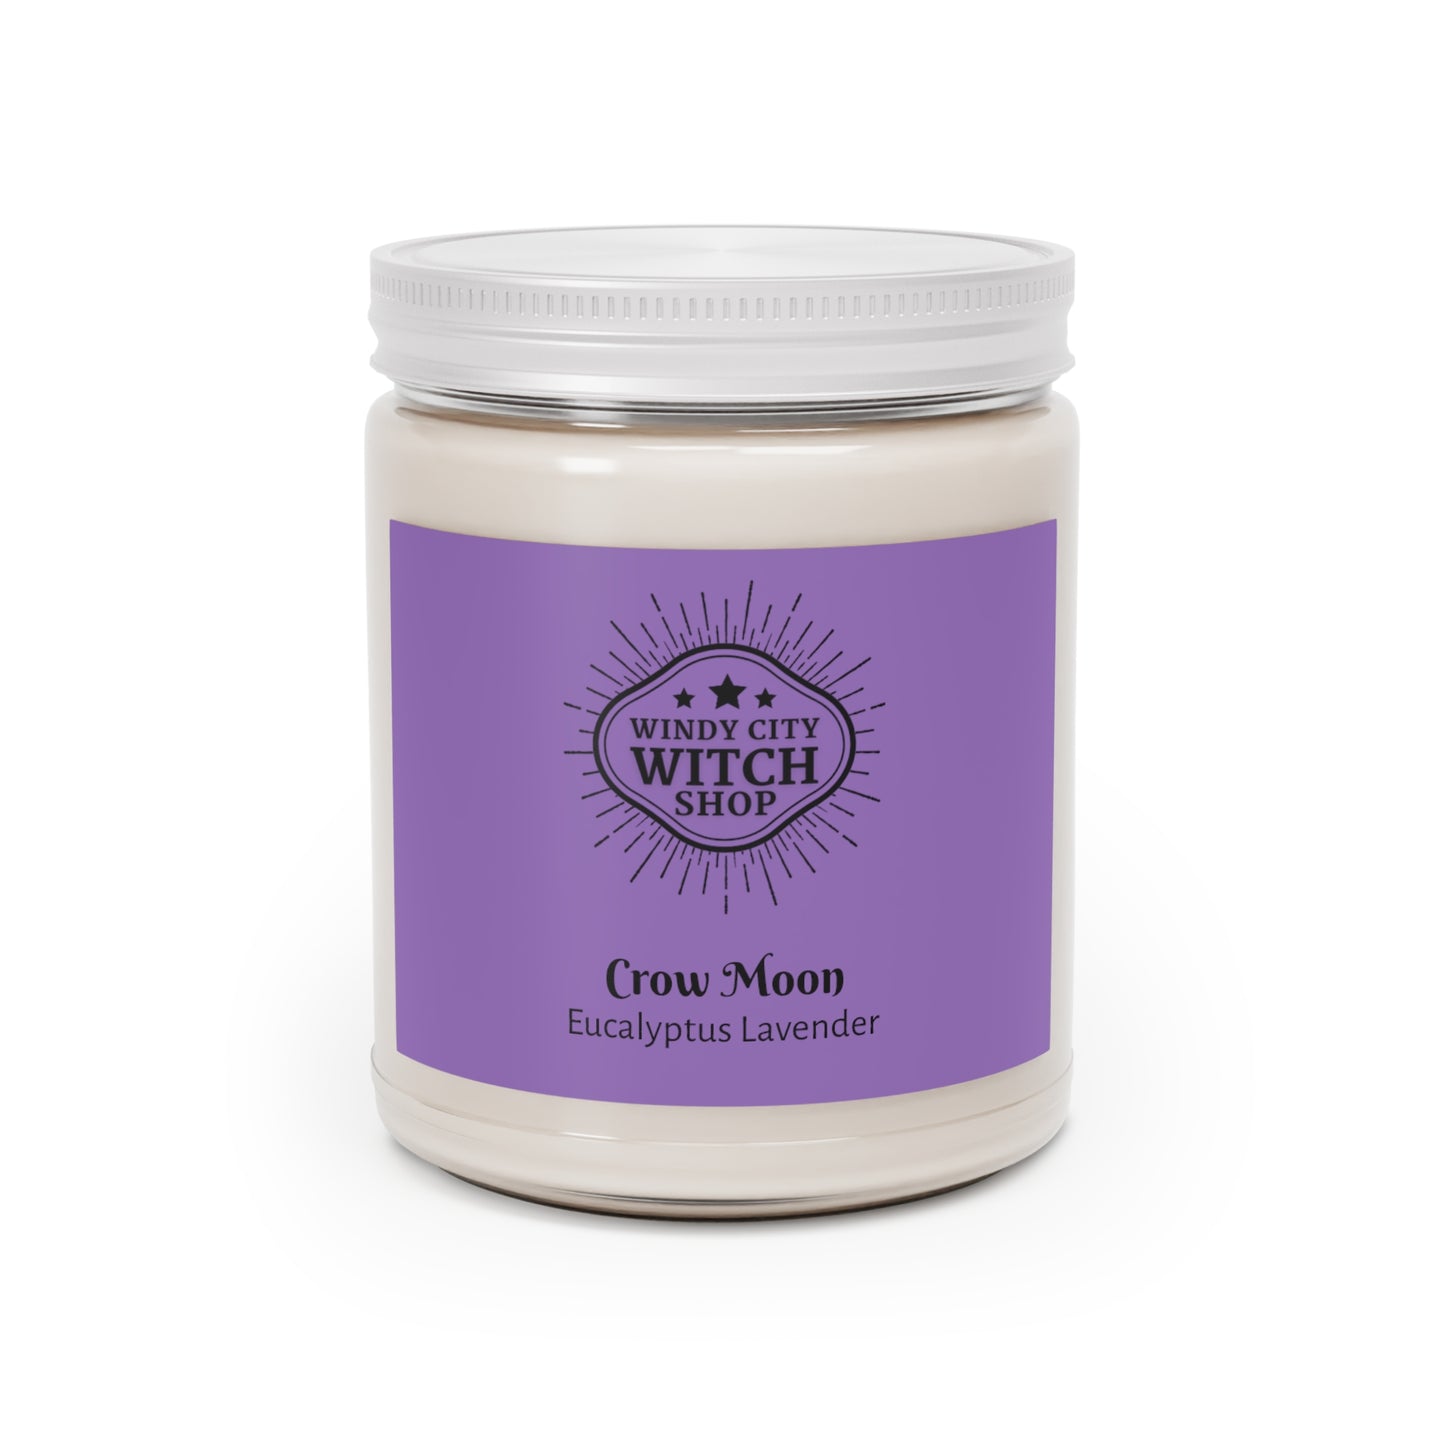 Crow Moon candle, scented